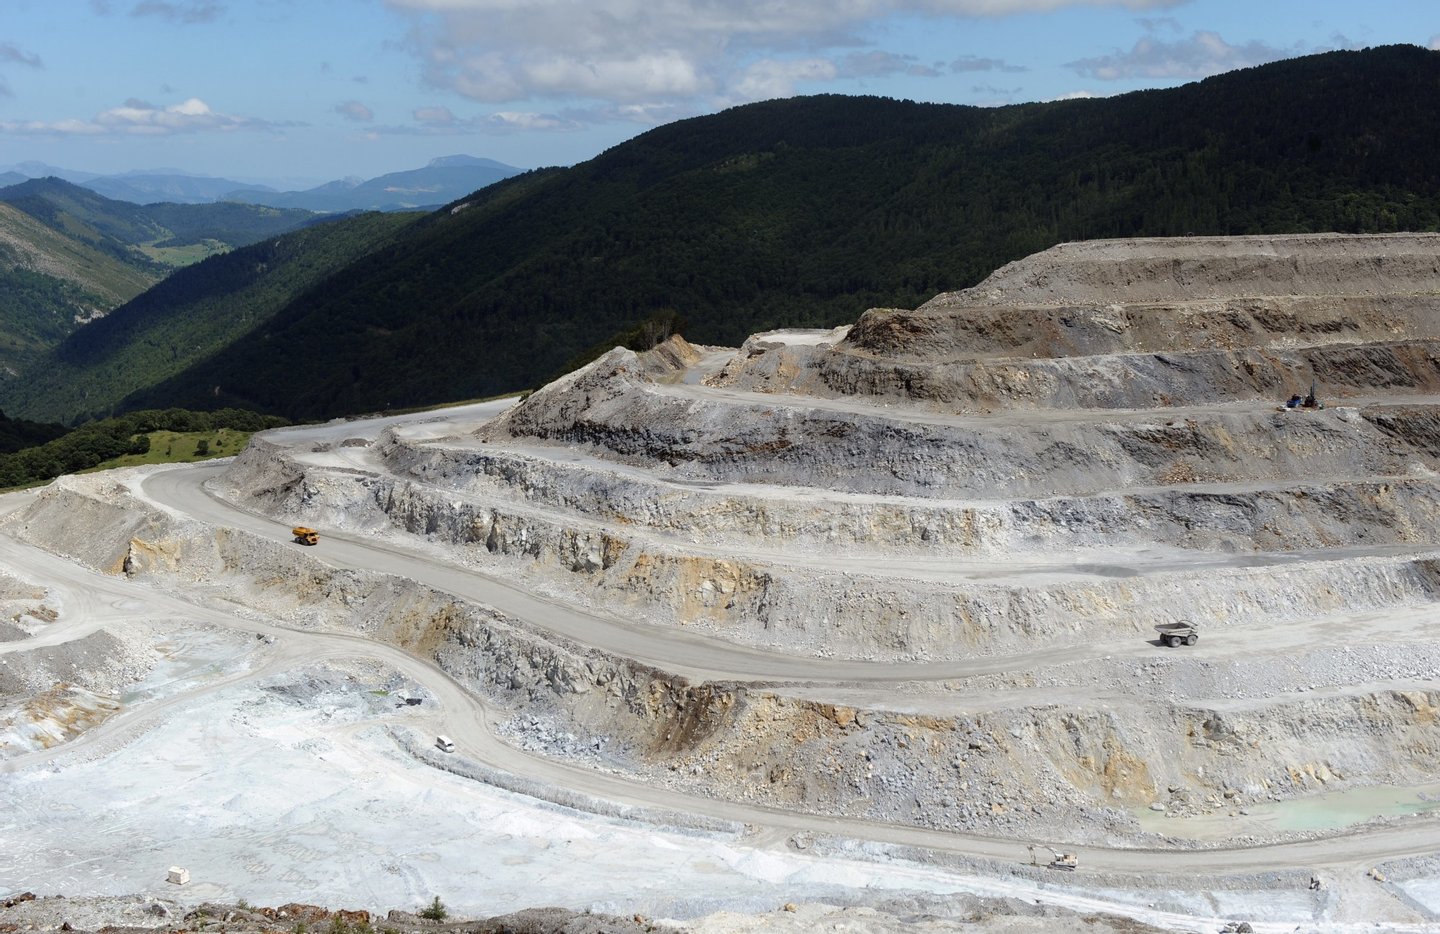 Photo taken on July 20, 2011 shows the largest talc quarry in Europe at an altitude of 1800 metres near the village of Luzenac, southern France. Talc (hydrated magnesium silicate) is a very soft mineral that is the main component of talcum powder. After being quarried, the rock is crushed into powder form and is also used in paper, plastics, cosmetics and paints. AFP PHOTO / ERIC CABANIS (Photo credit should read ERIC CABANIS/AFP/Getty Images)